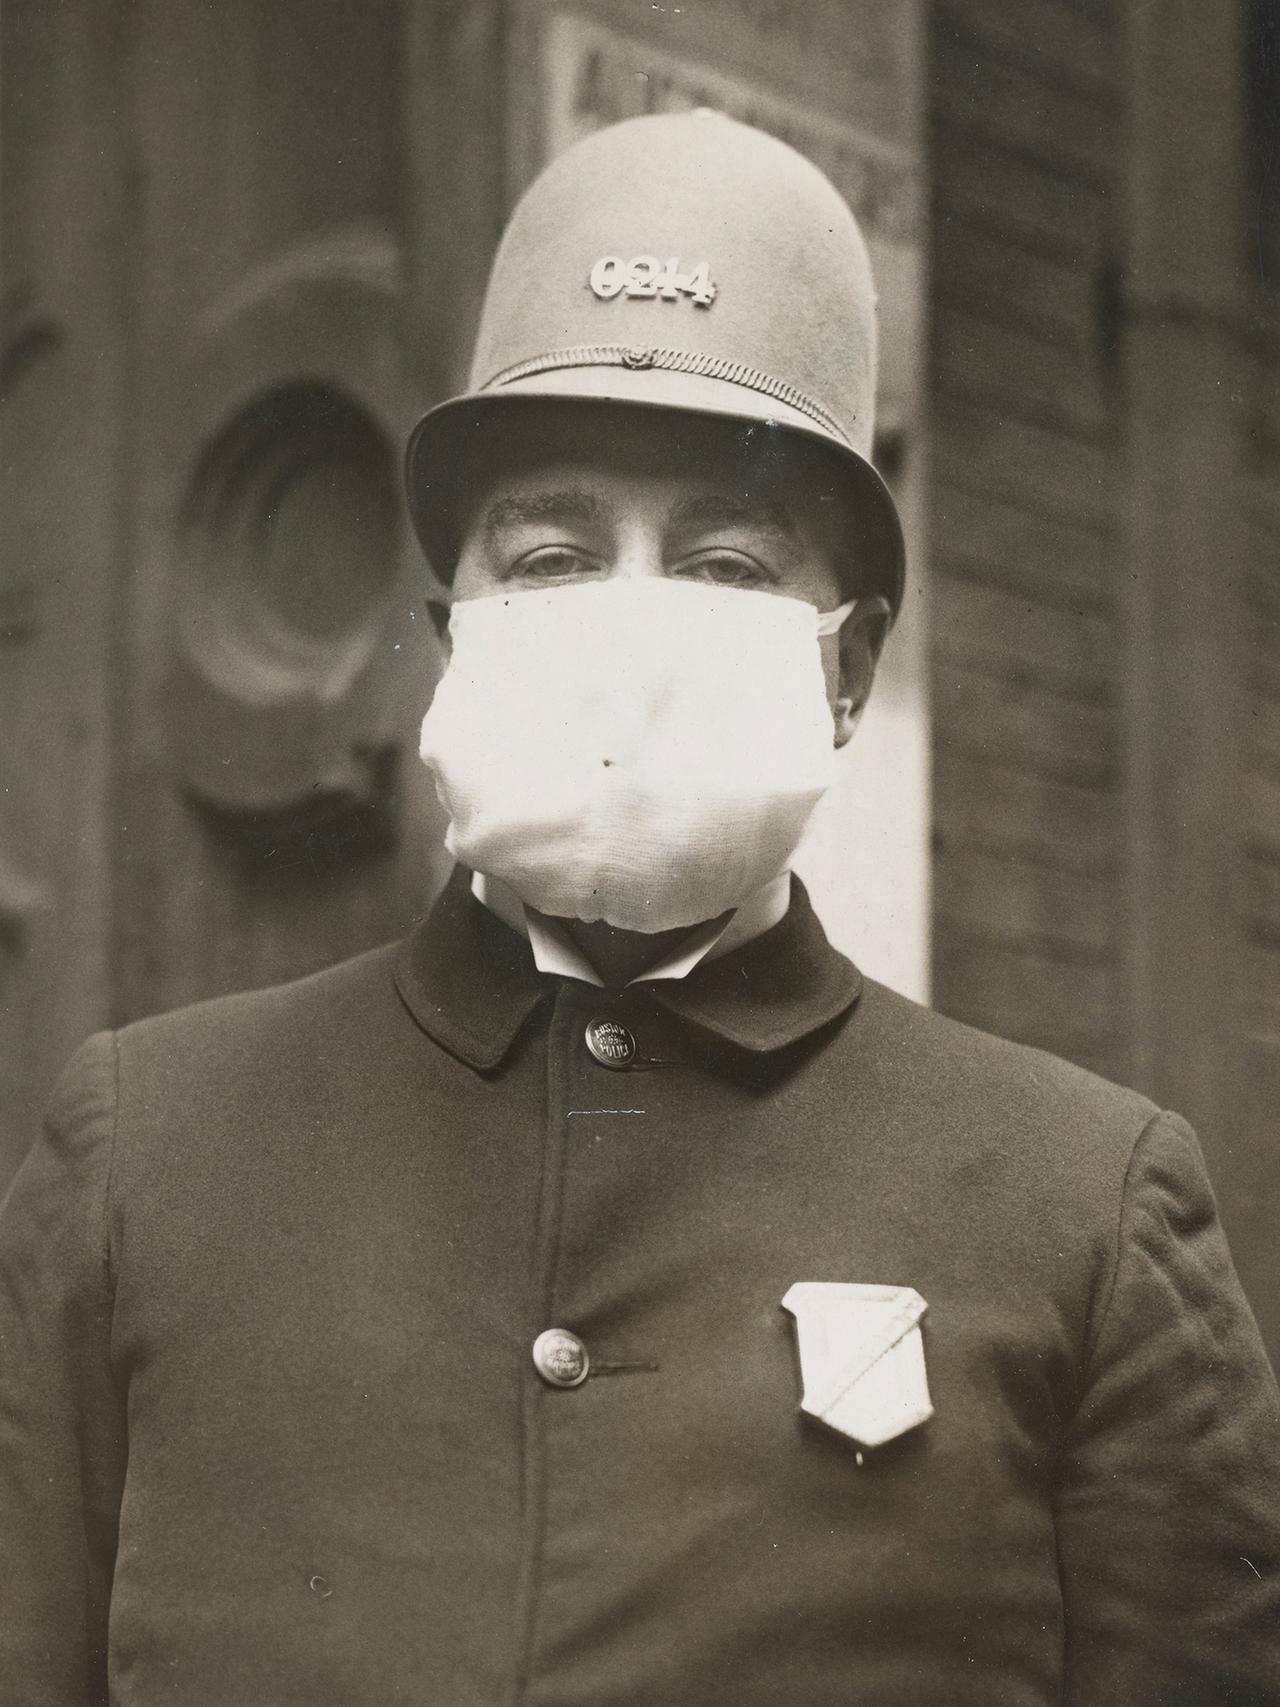 Influenza Epidemic - Policeman Wearing a Mask - NYC in 1918